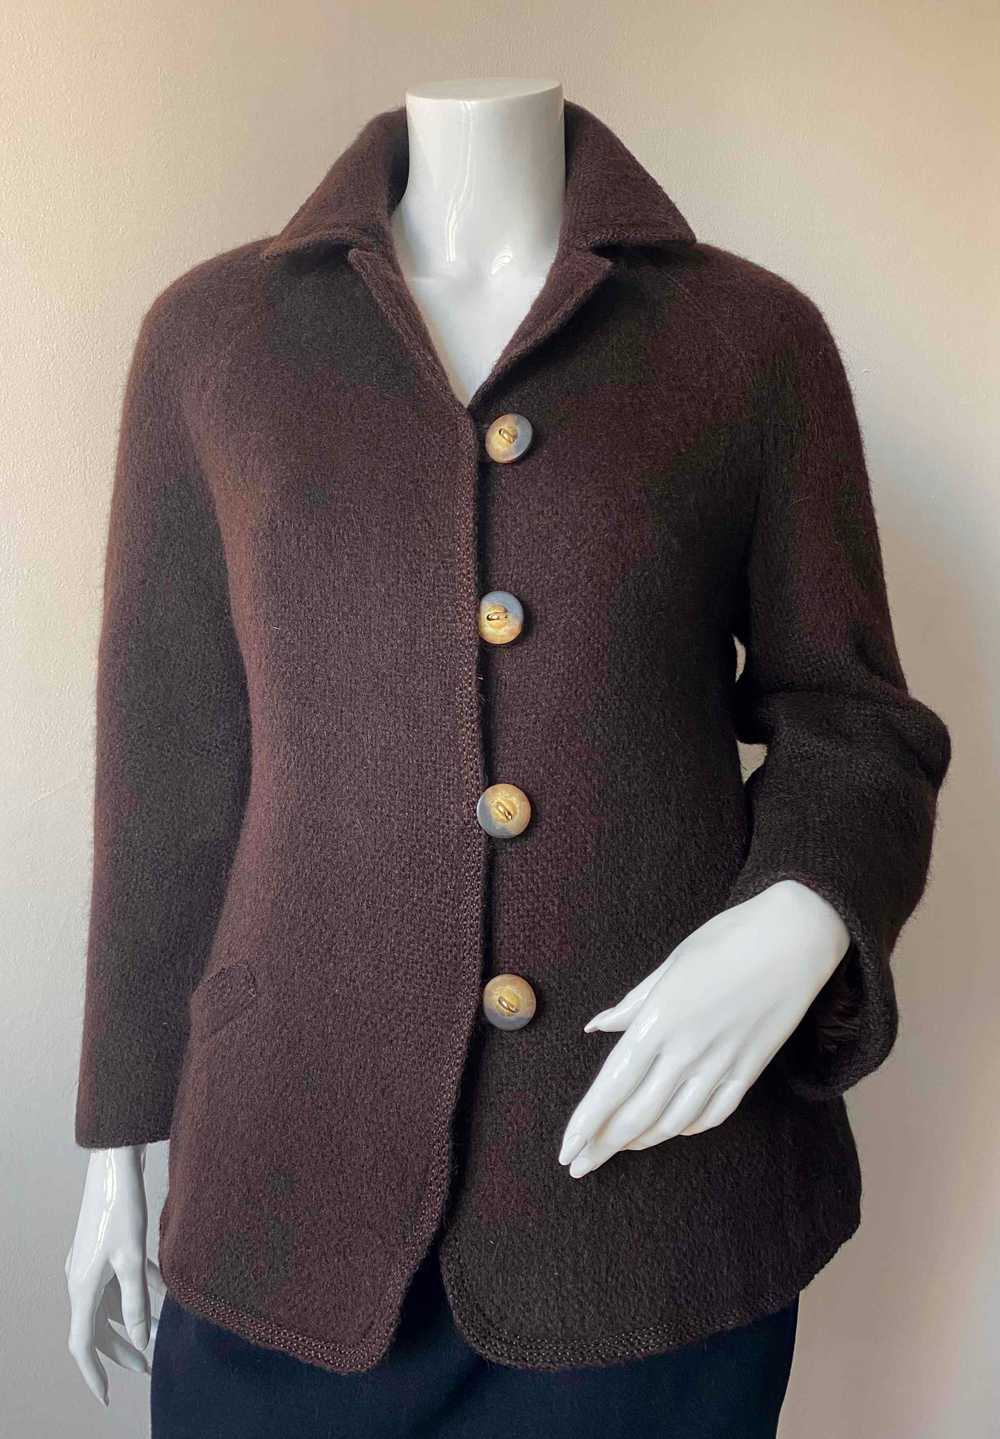 Wool jacket - Cropped knitted mohair jacket - image 2